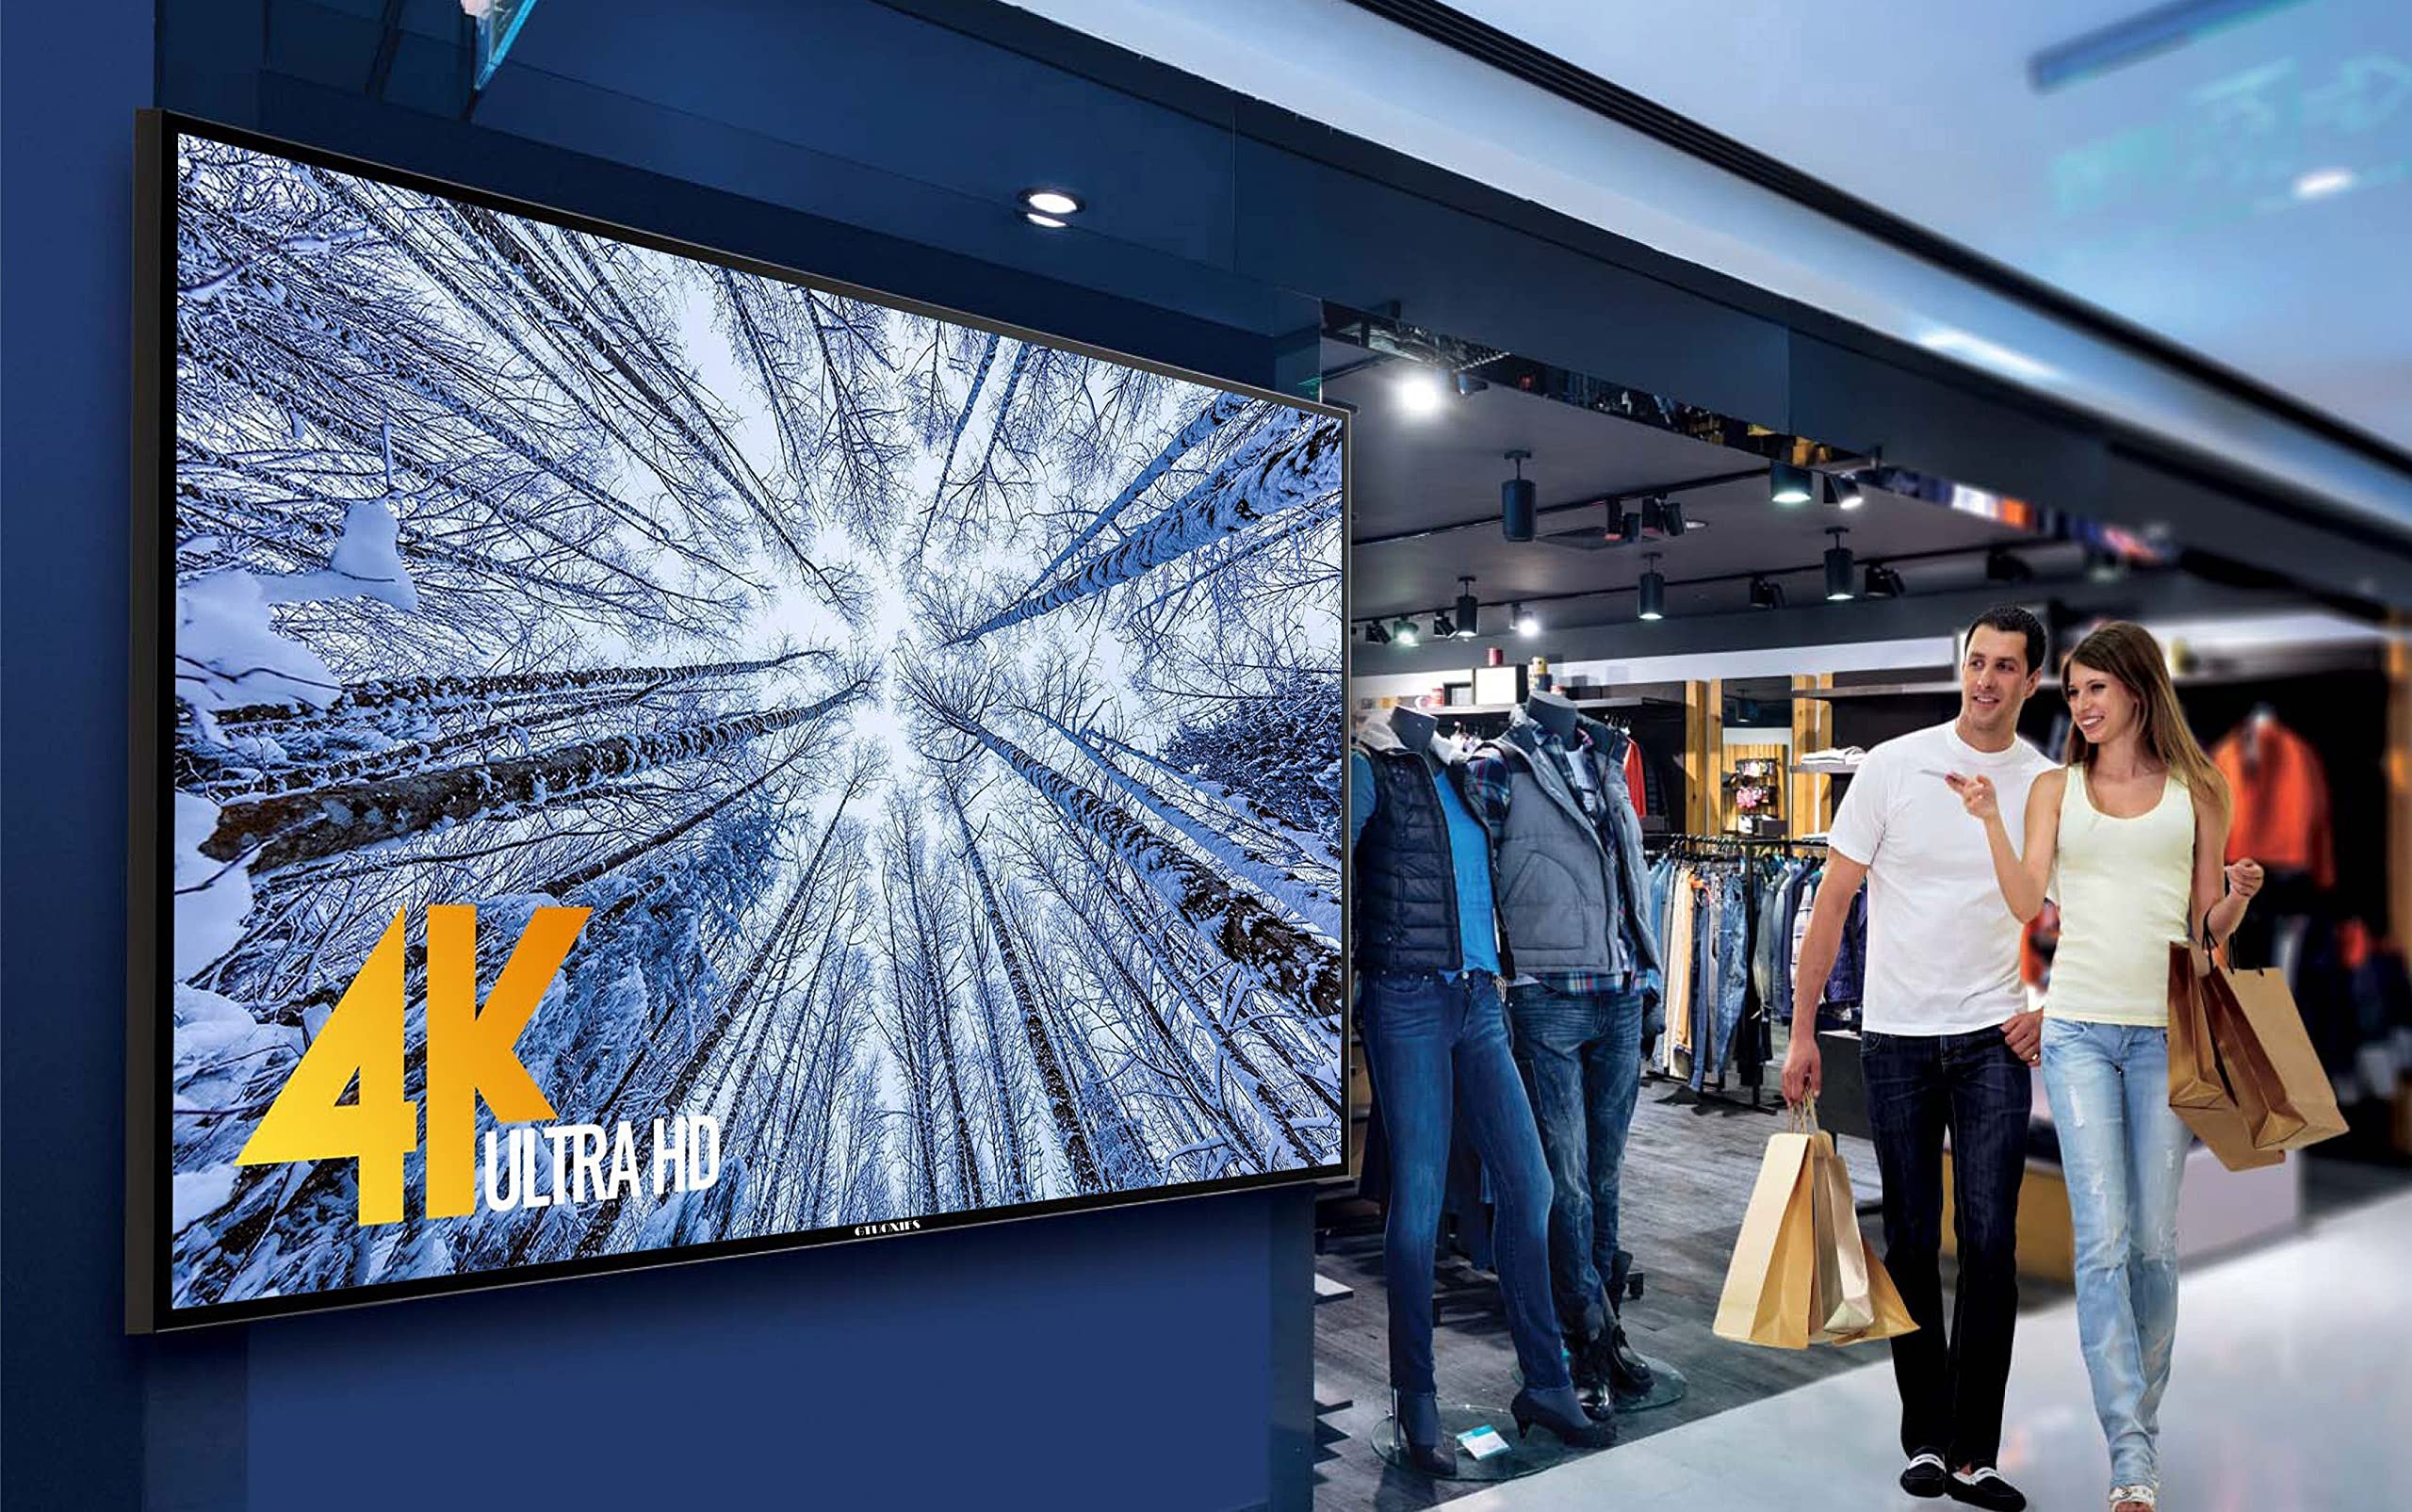 GTUOXIES 100 Inch LCD Panel 4K UHD Smart TV; TS100TD, High Brightness, High Contrast Makes Images Clearly Visible from A Distance